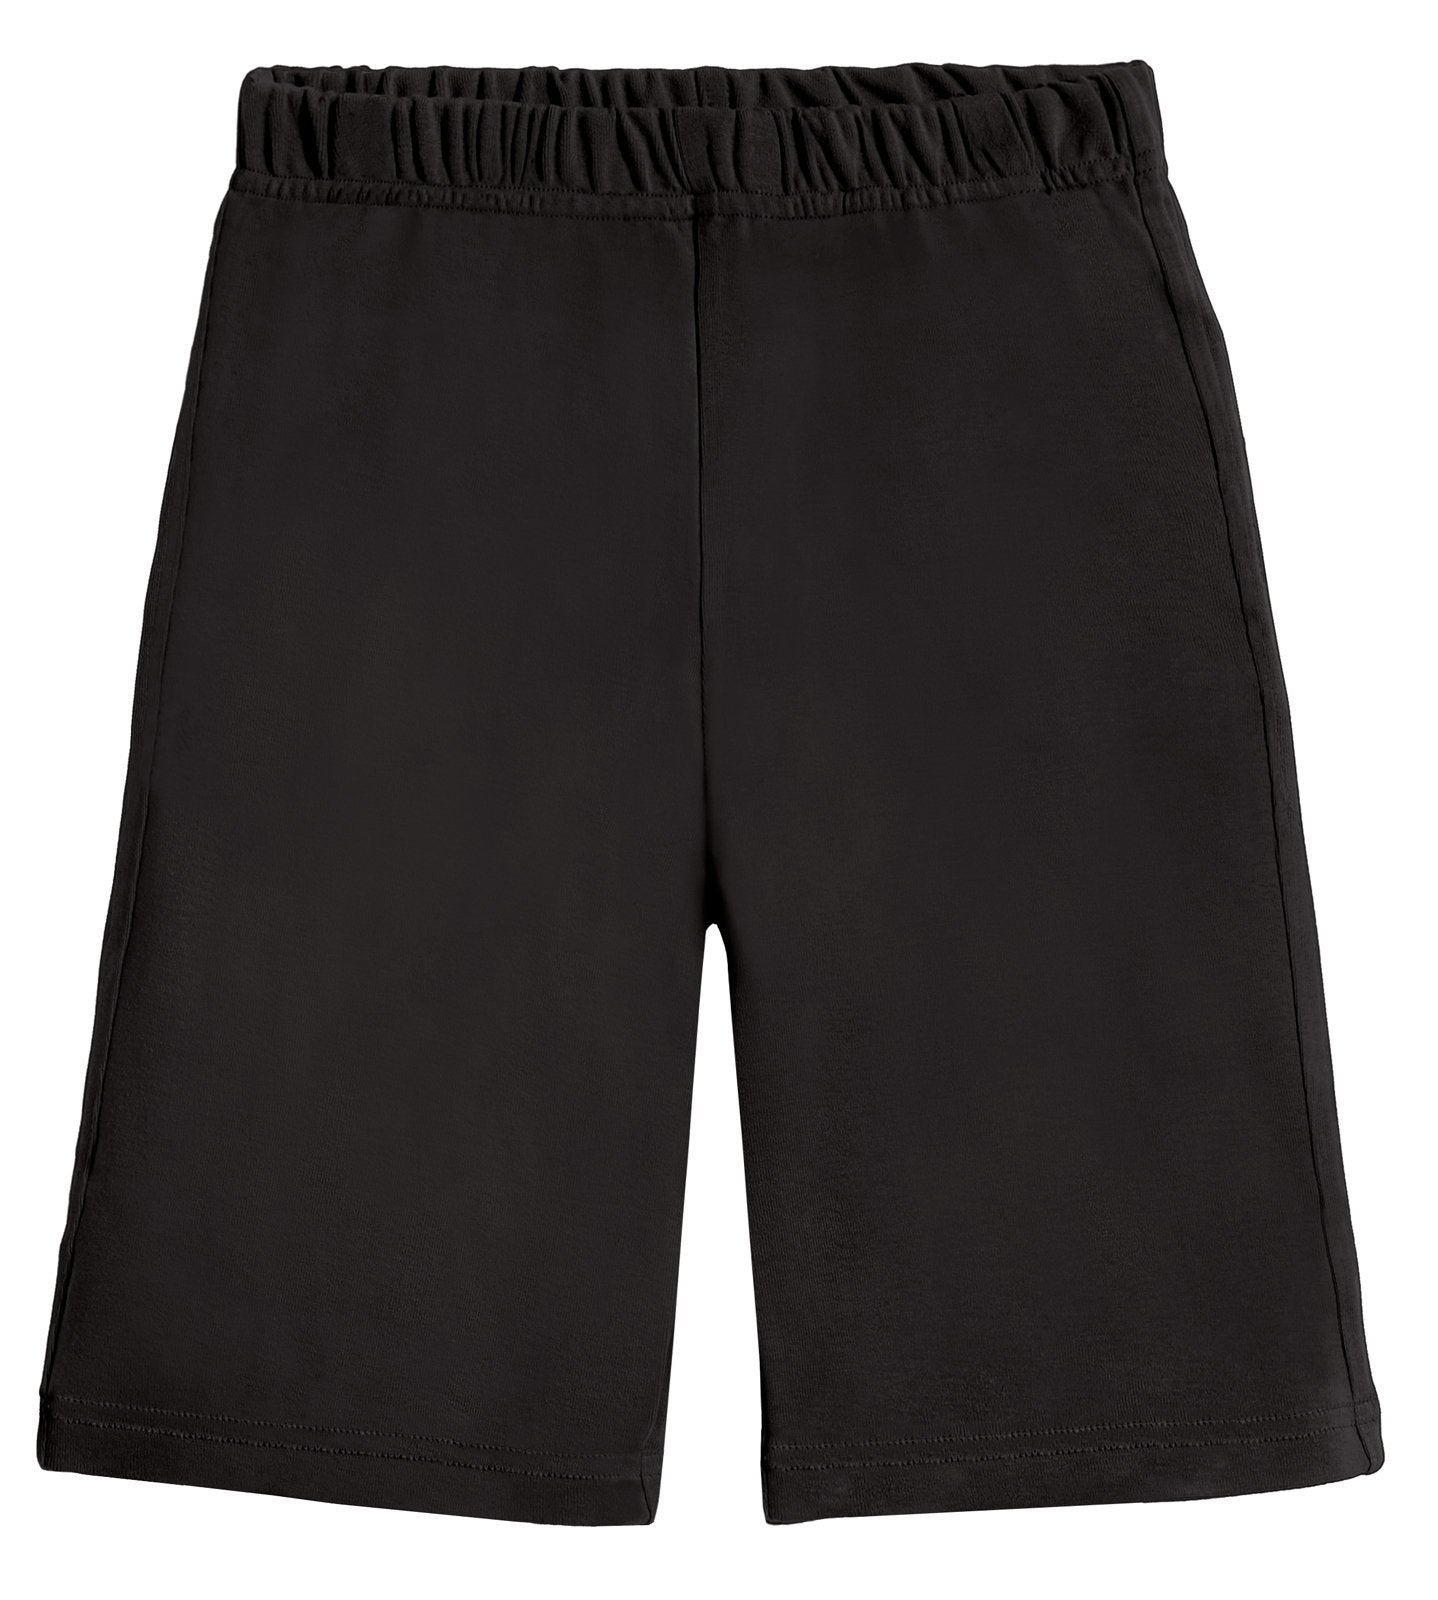 Tuff Athletics Black Elastic Waist Shorts Size Small - $12 New With Tags -  From Hi